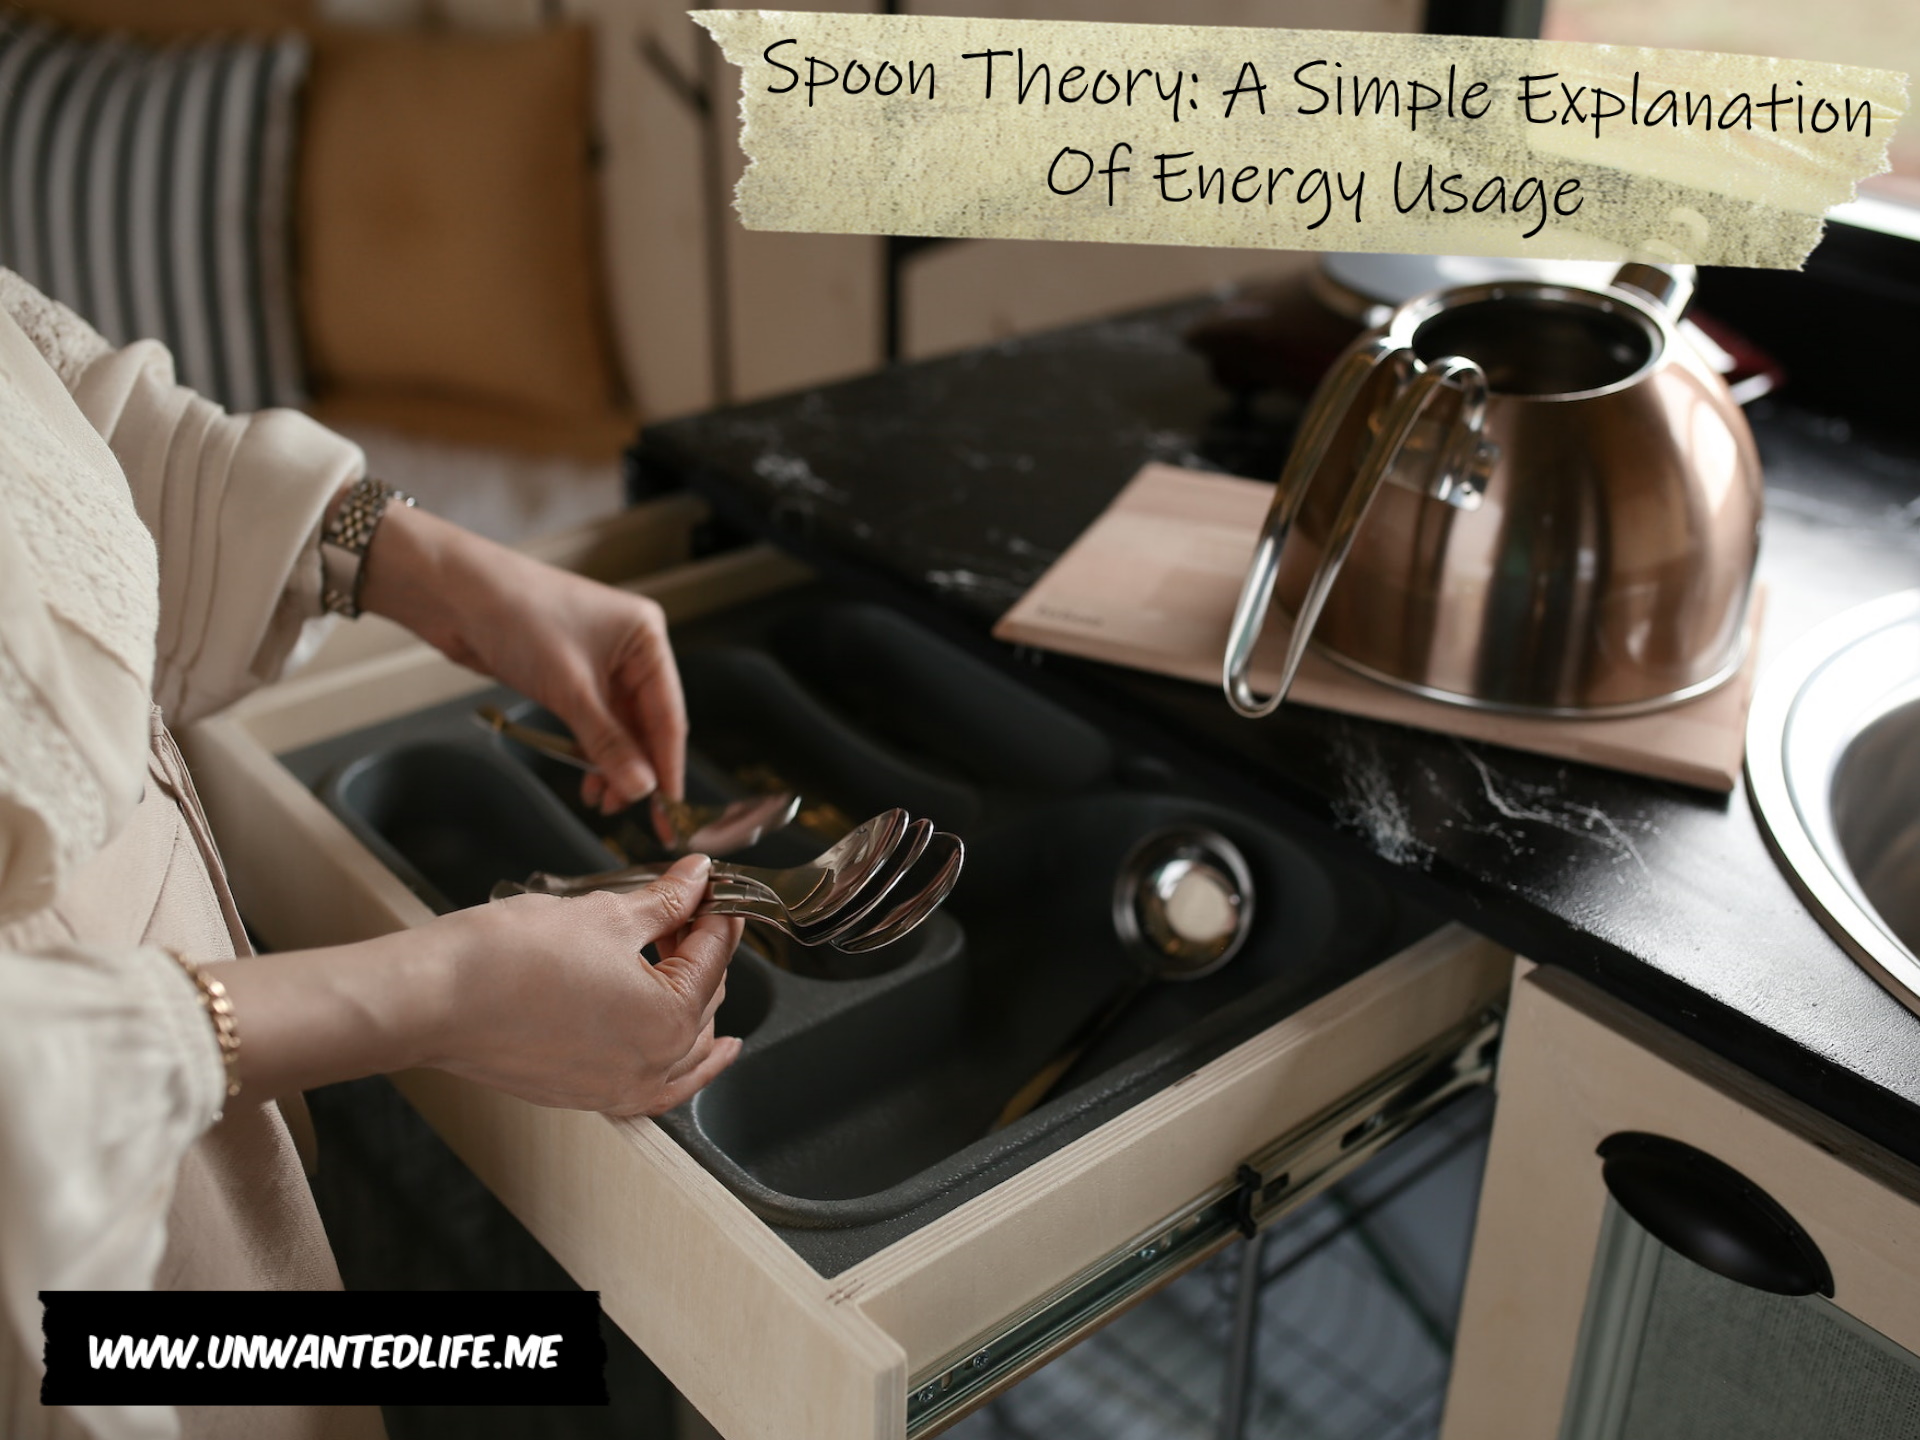 A photo of a woman putting her spoons into a drawer to represent the topic of the article - Spoon Theory: A Simple Explanation Of Energy Usage